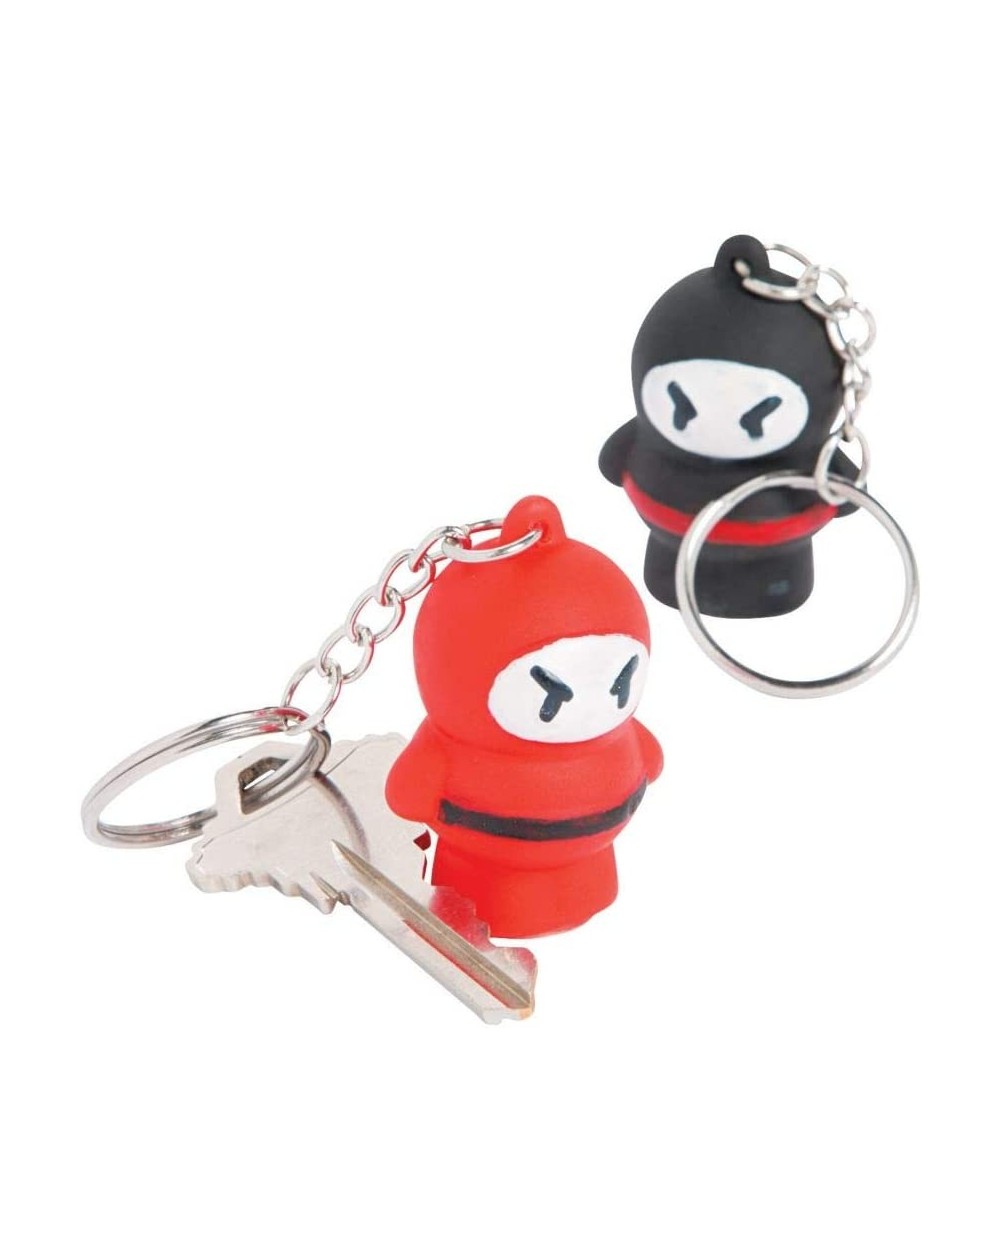 Party Favors NINJA KEY CHAIN - Apparel Accessories - 12 Pieces - CP12FWHJ78N $15.23